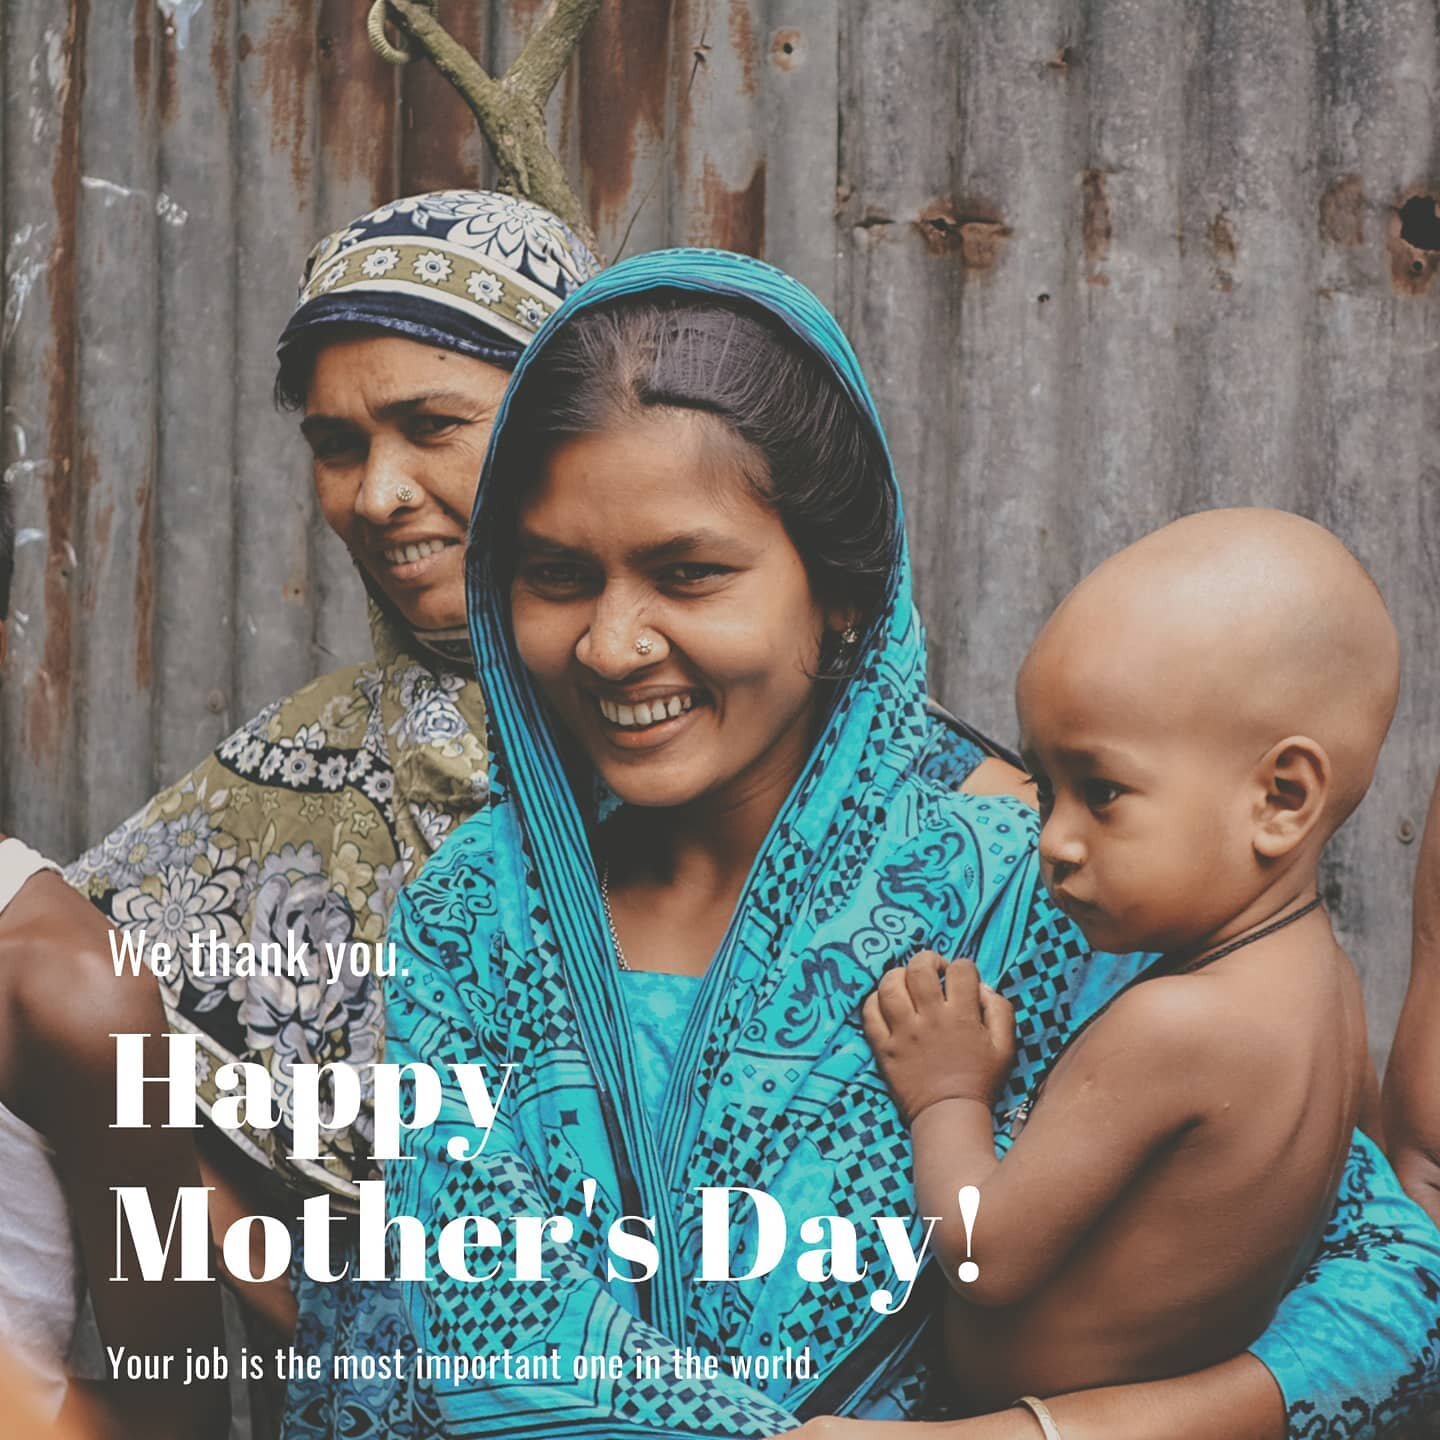 Happy Mother's Day!

At Mothers First, we believe we should celebrate women and mothers everyday. 

To all the mum's out there - you are amazing. Tag your mum and let us know why she's so special 🧡